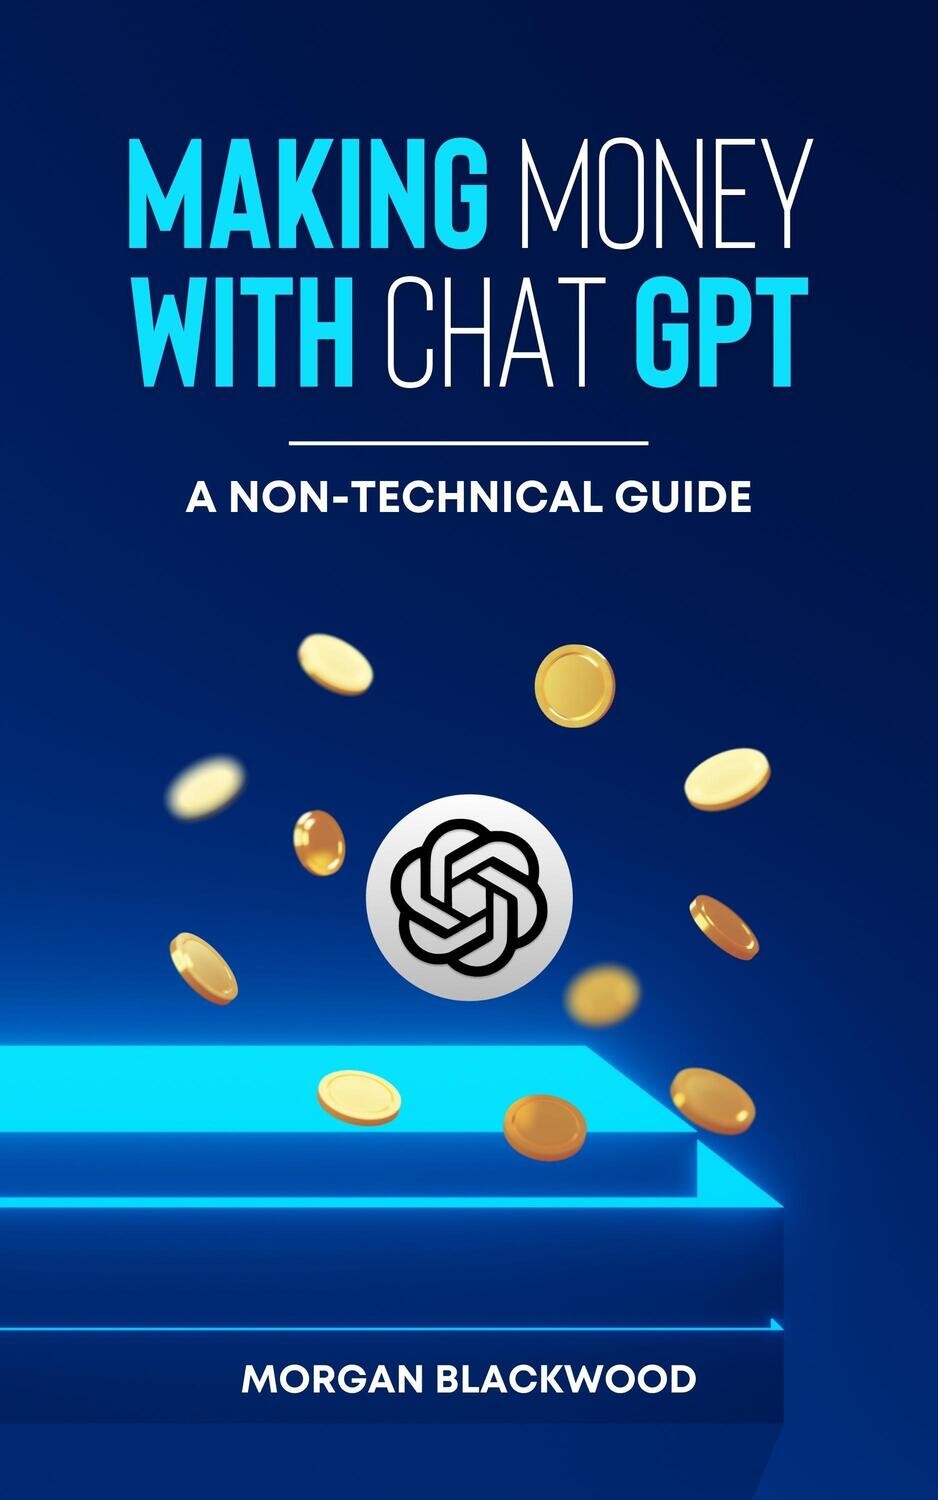 ChatGPT Guide - Non Technical Ways to Make Money